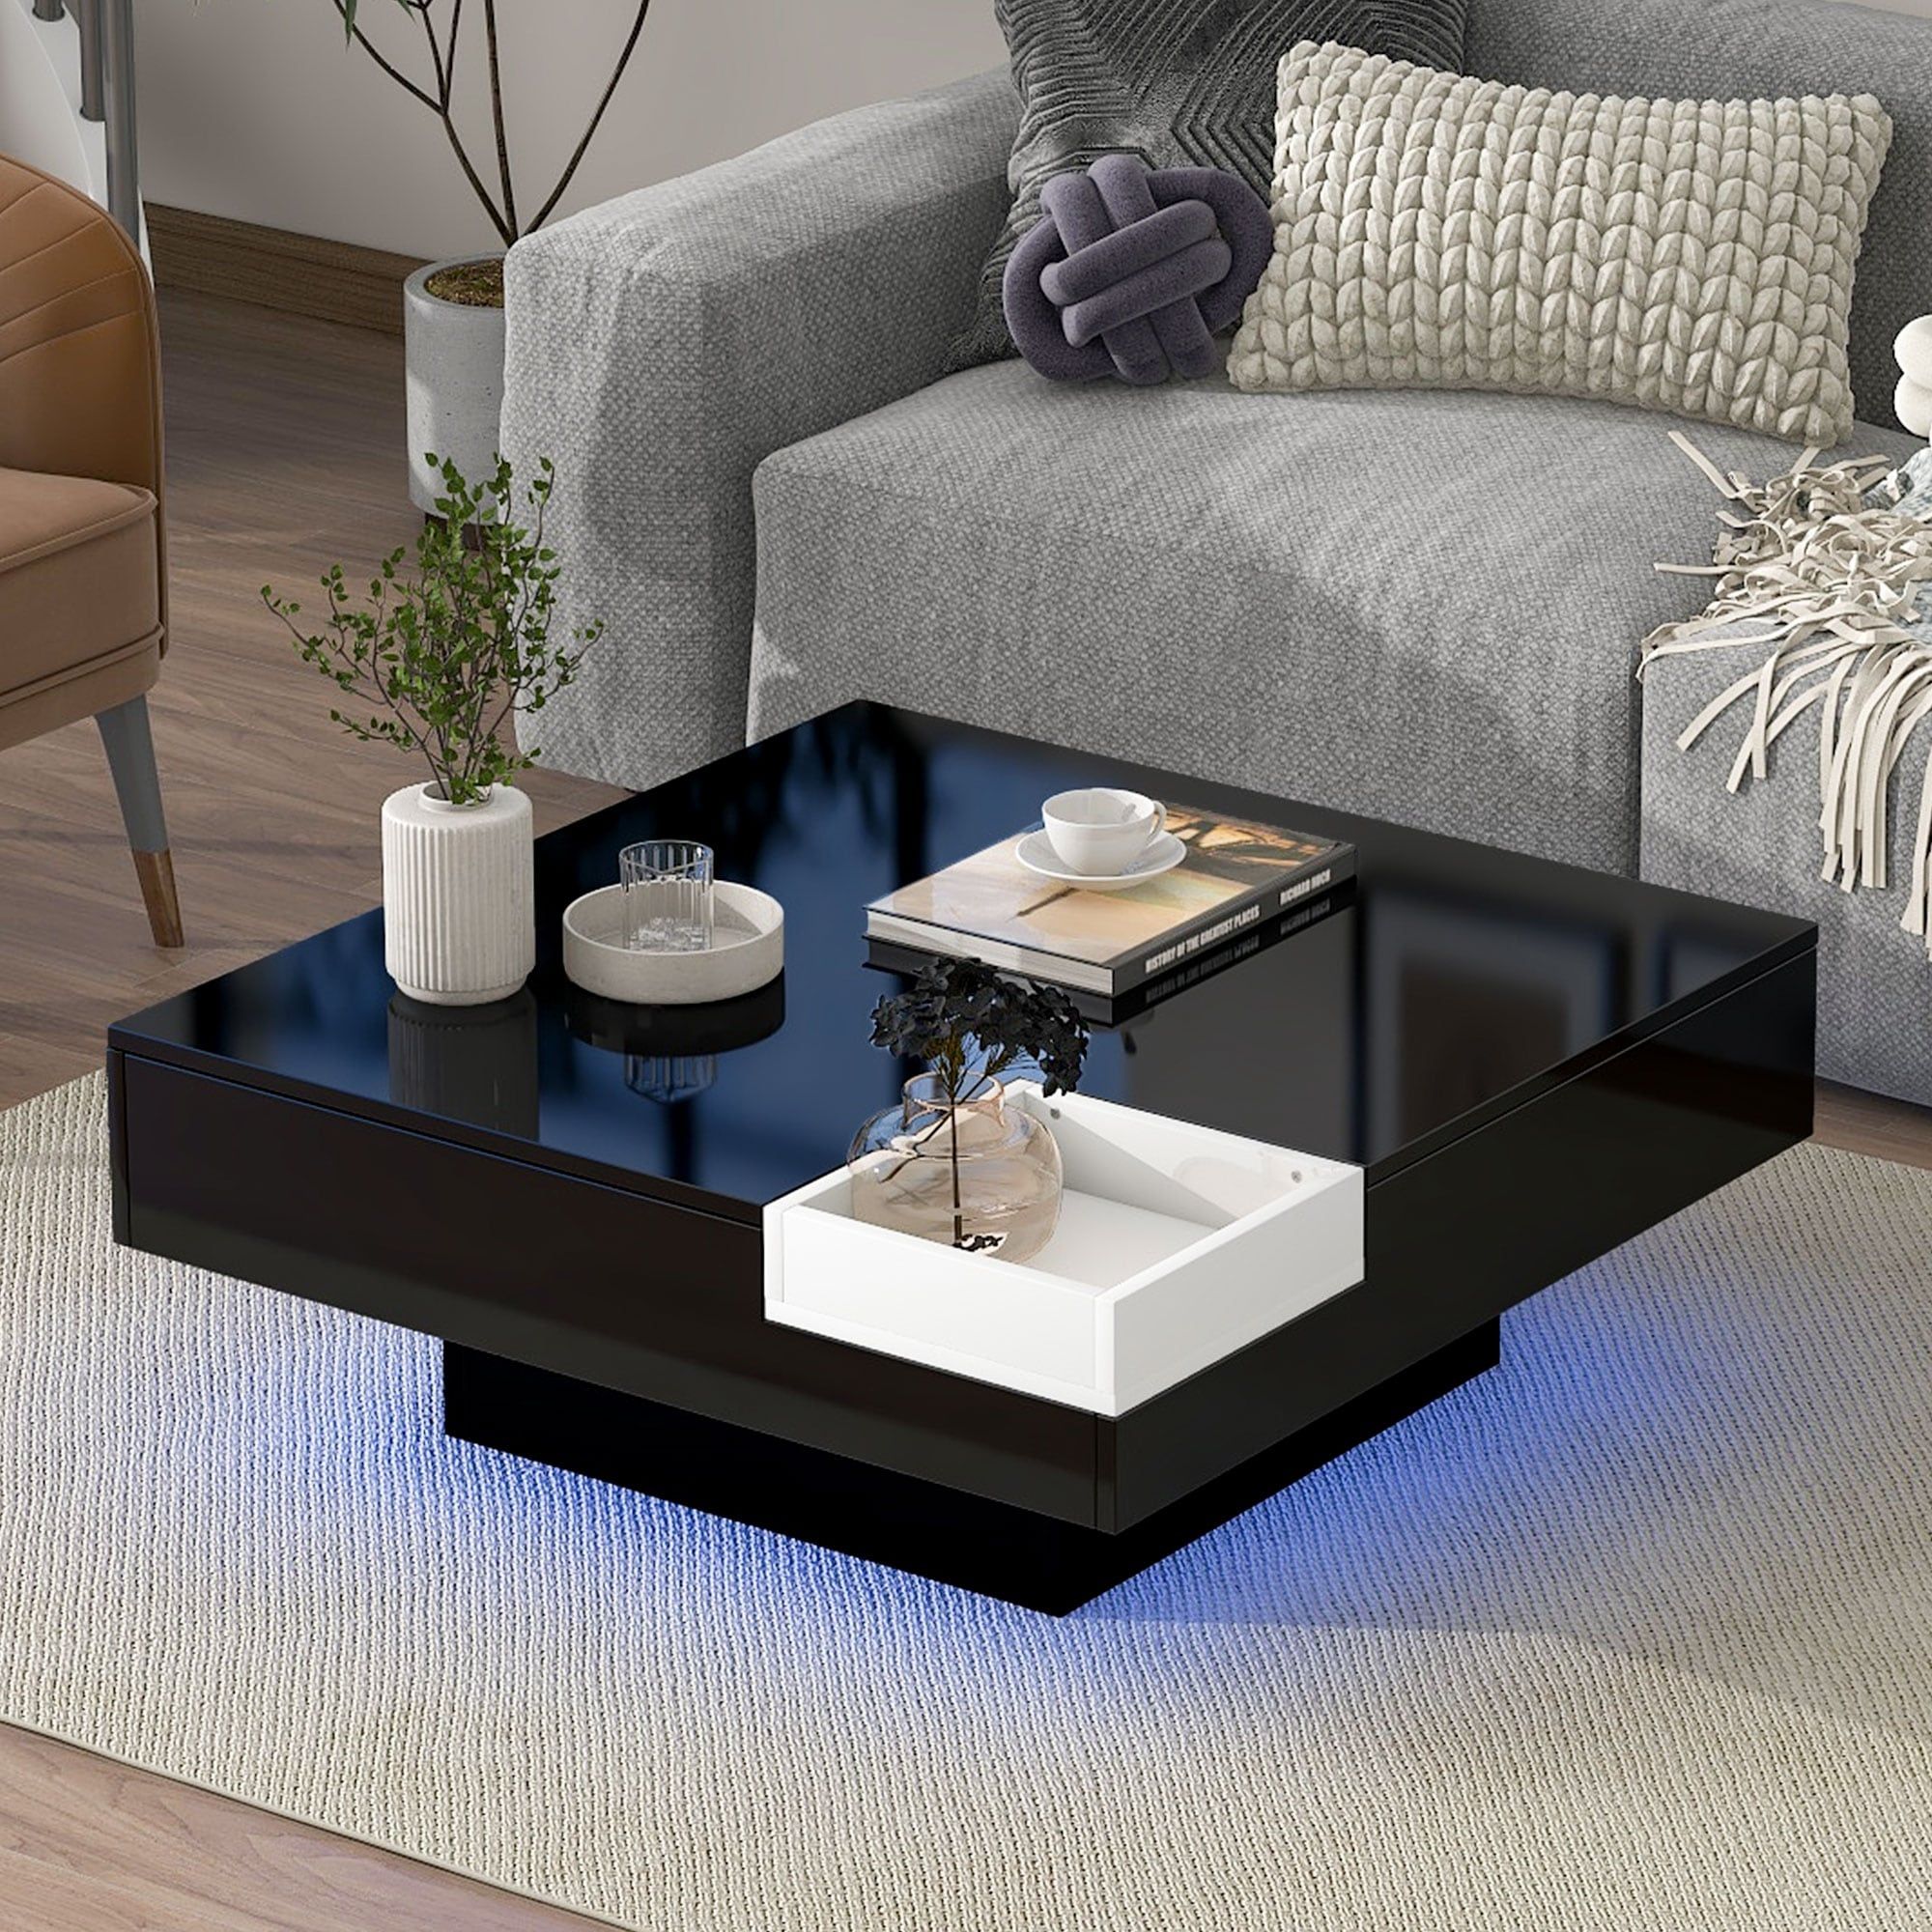 Square Coffee Table With Detachable Tray And Plug In 16 Color Led Strip  Lights Remote Control – Bed Bath & Beyond – 37367161 Within Detachable Tray Coffee Tables (View 2 of 15)